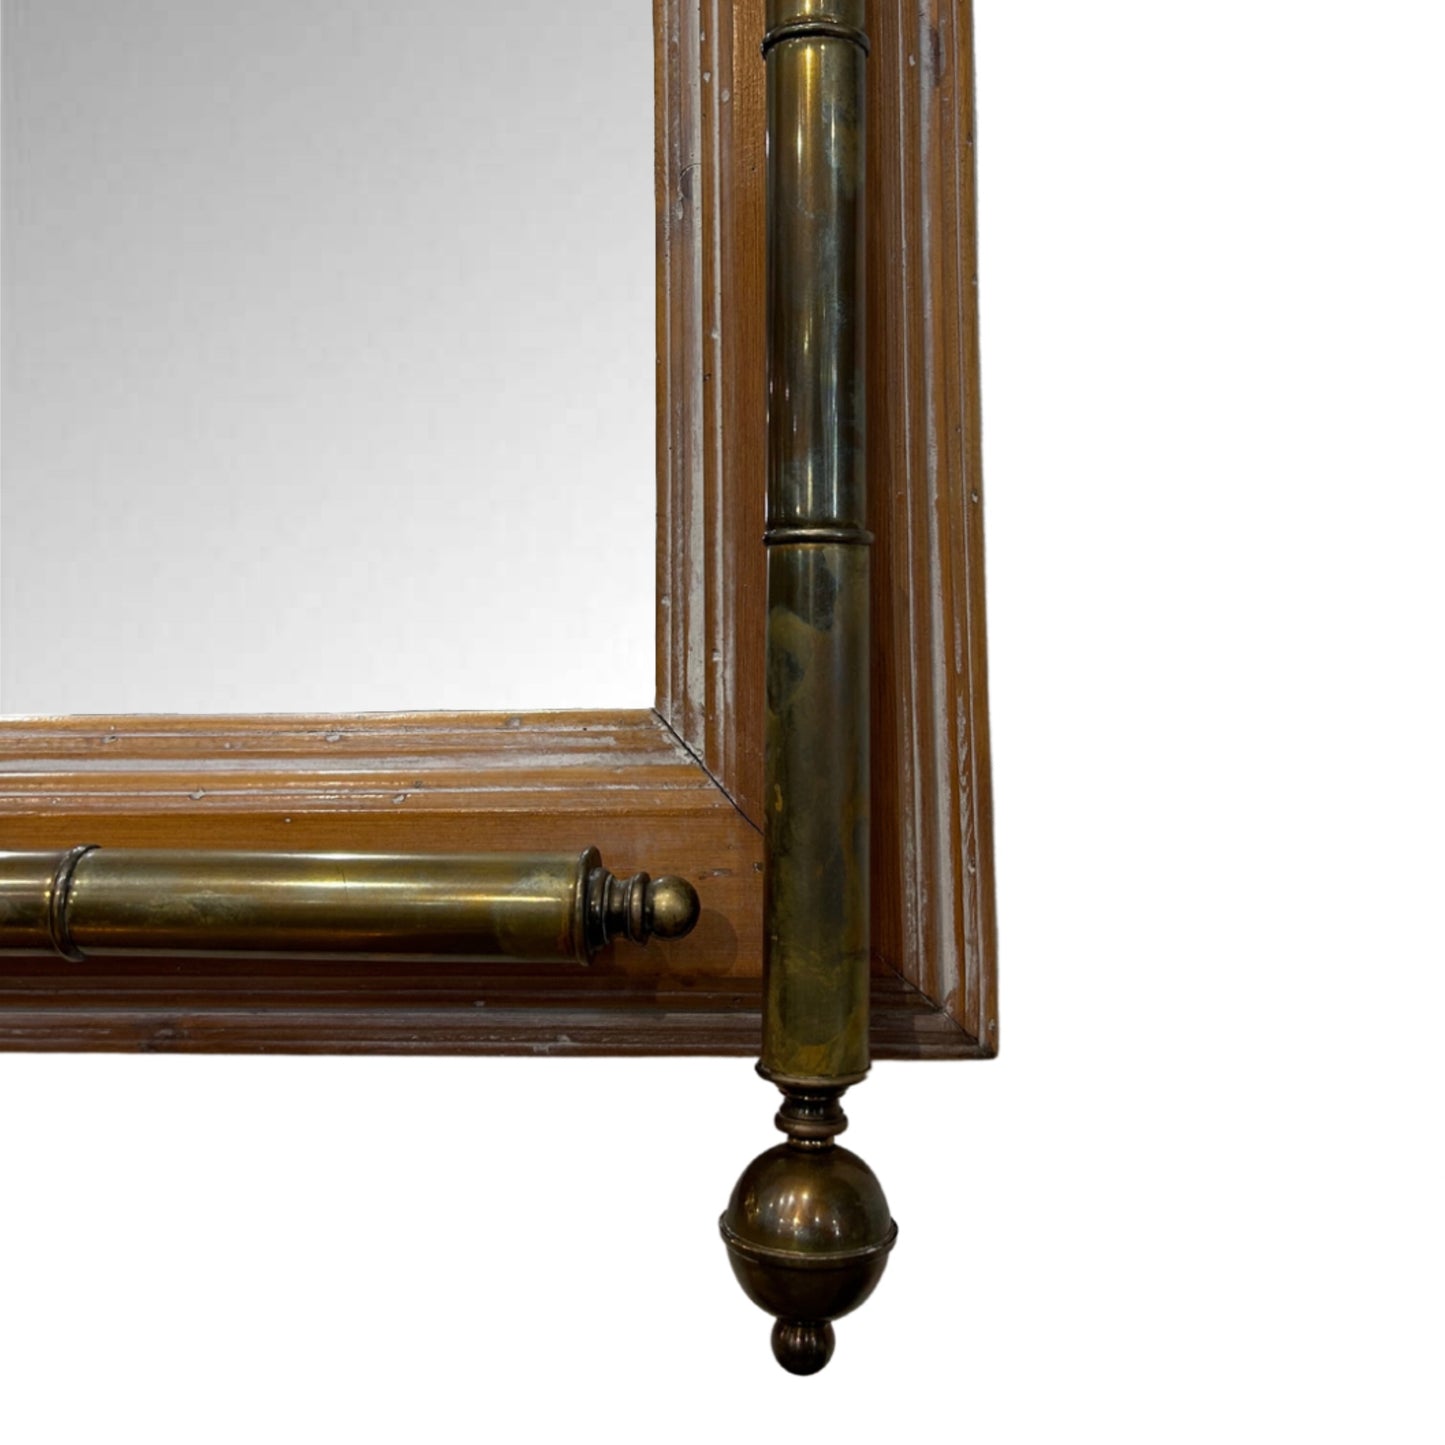 Vintage Wood and Brass Mirror